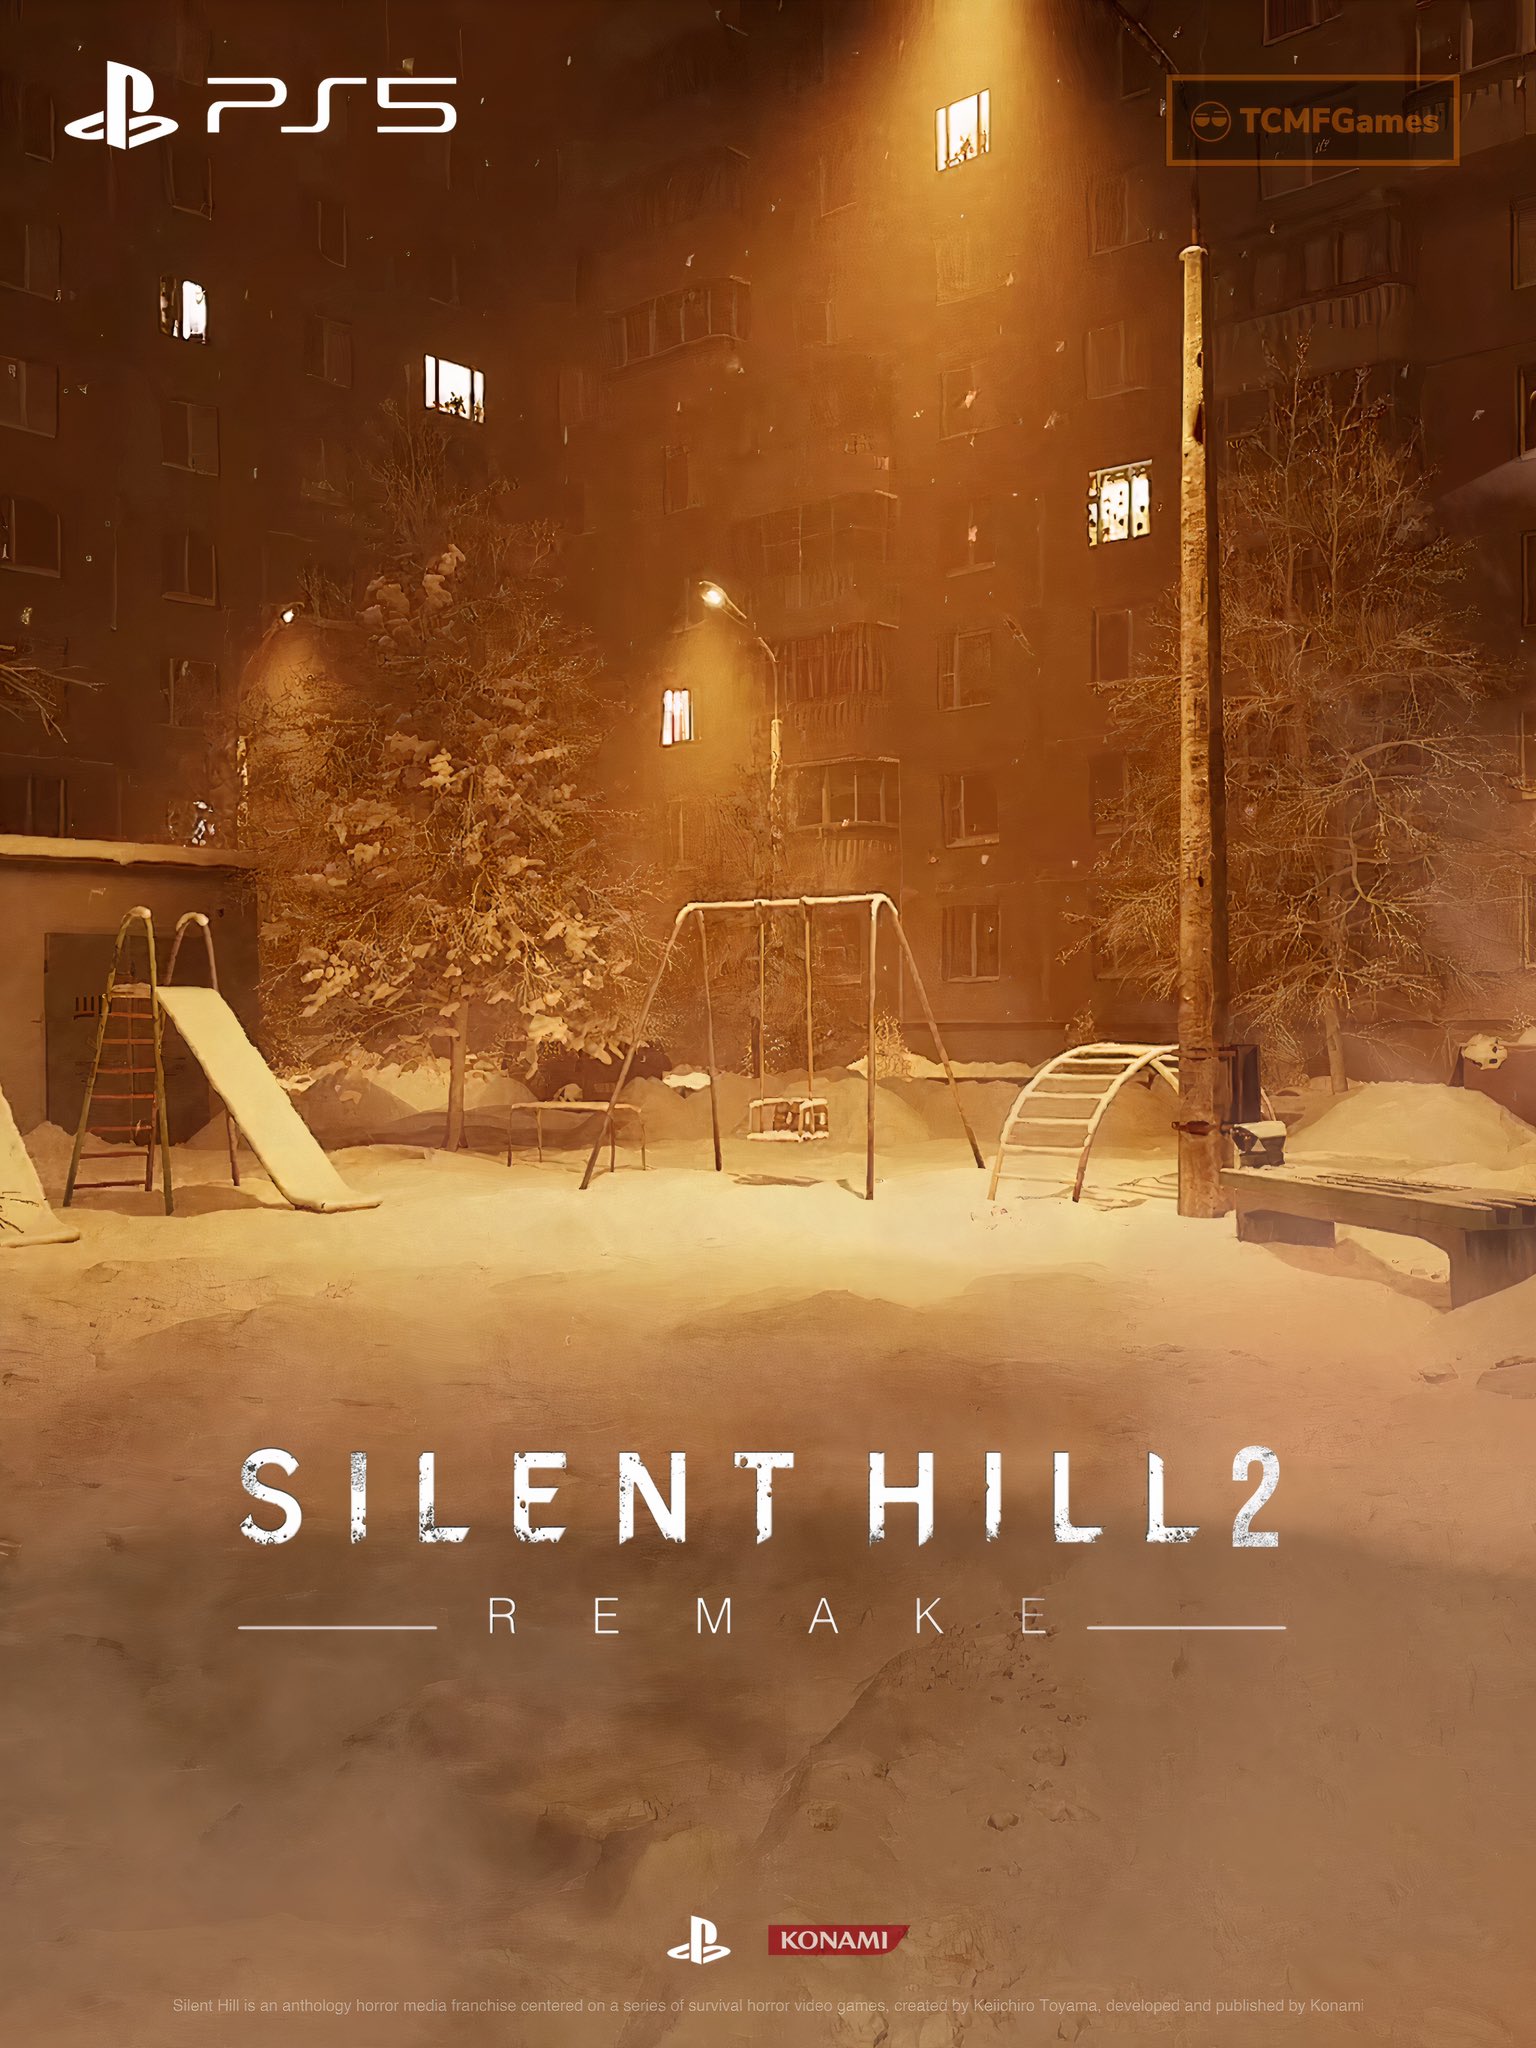 TCMFGames on X: We're hours away - PS5, PlayStation, Silent Hill 2  Remake